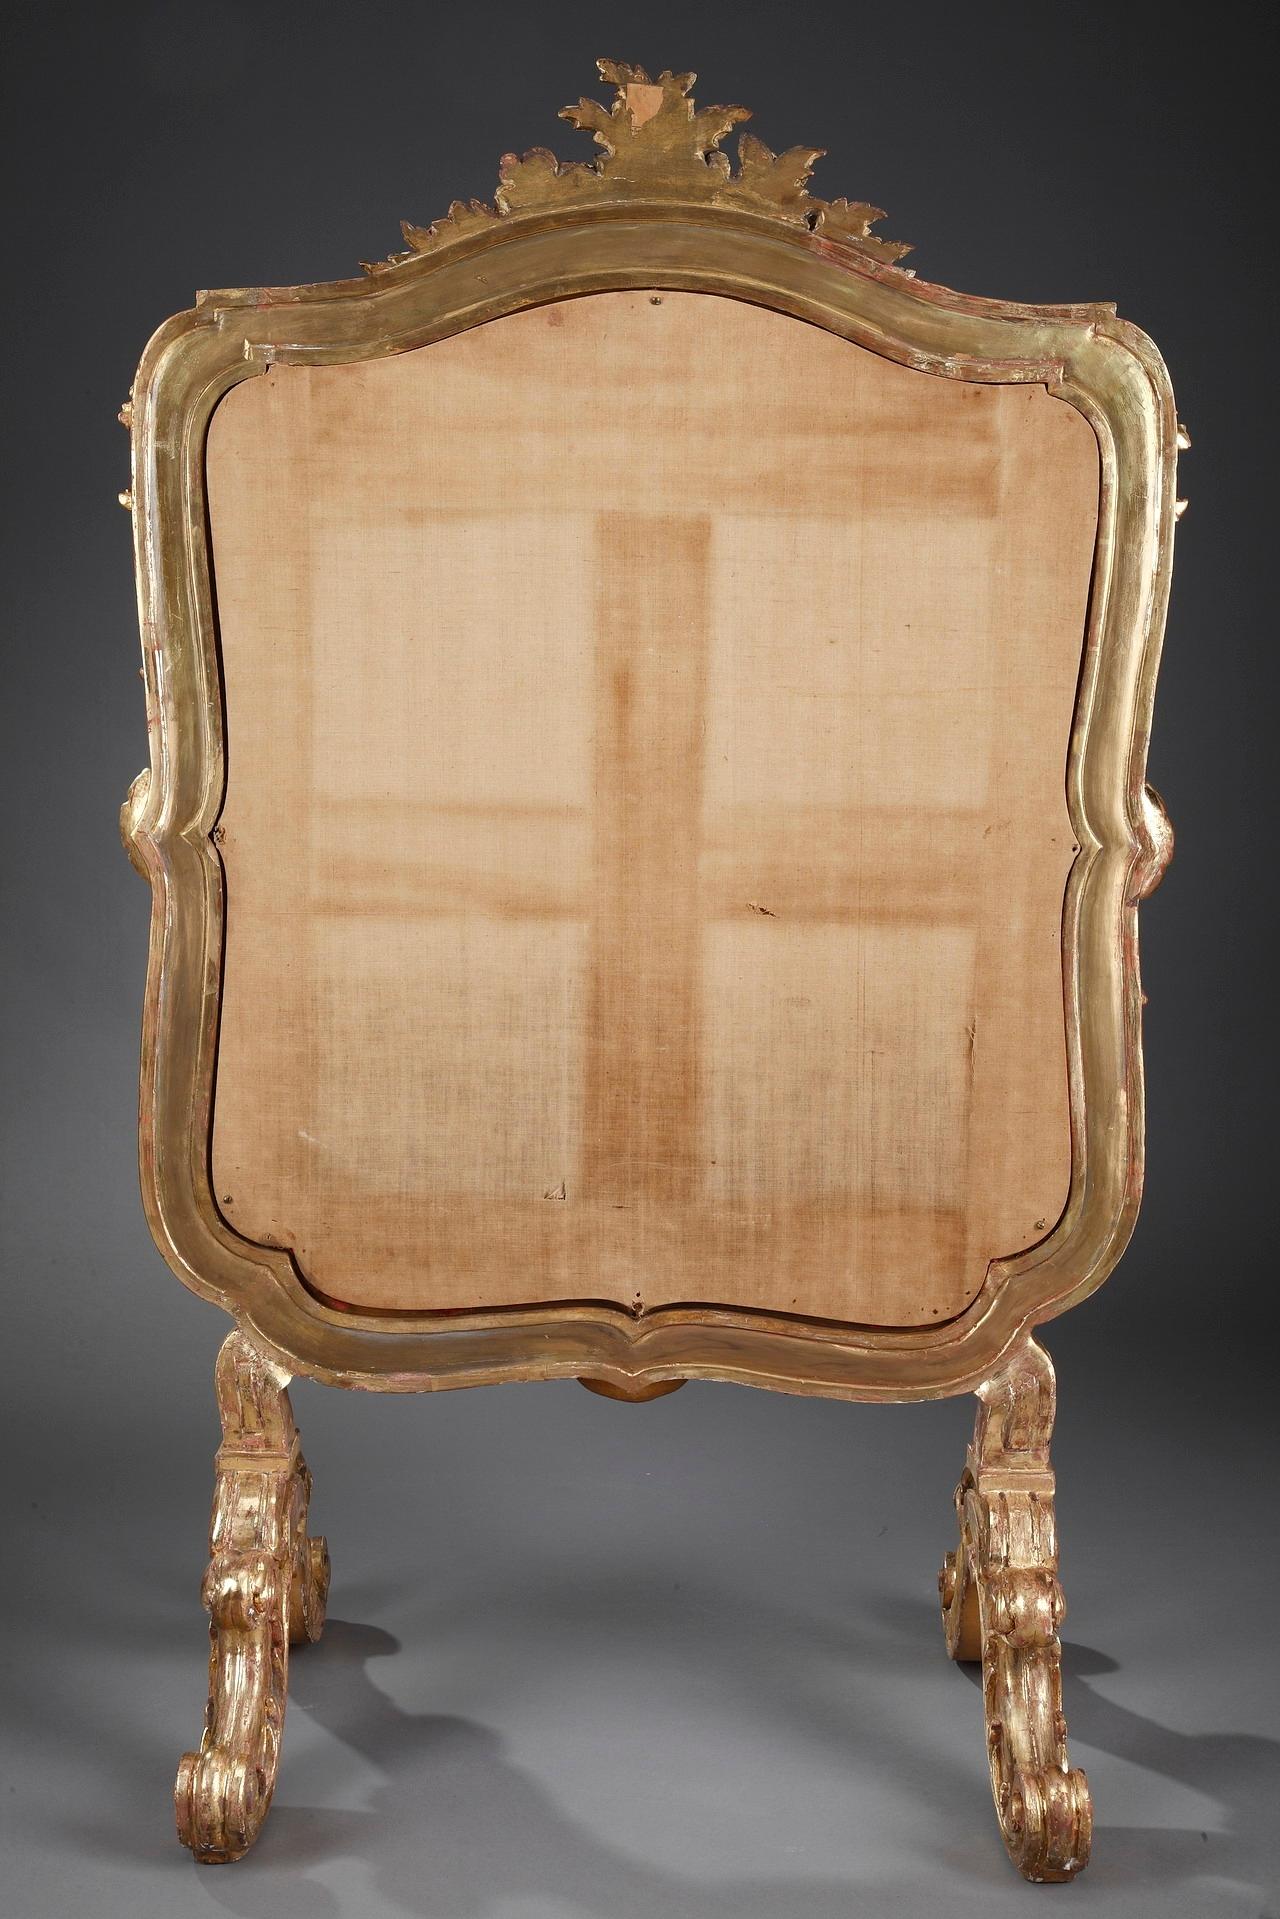 Giltwood Fire Screen in Louis XV-Style, Charles Mauricheau-Beaupré Collection 13